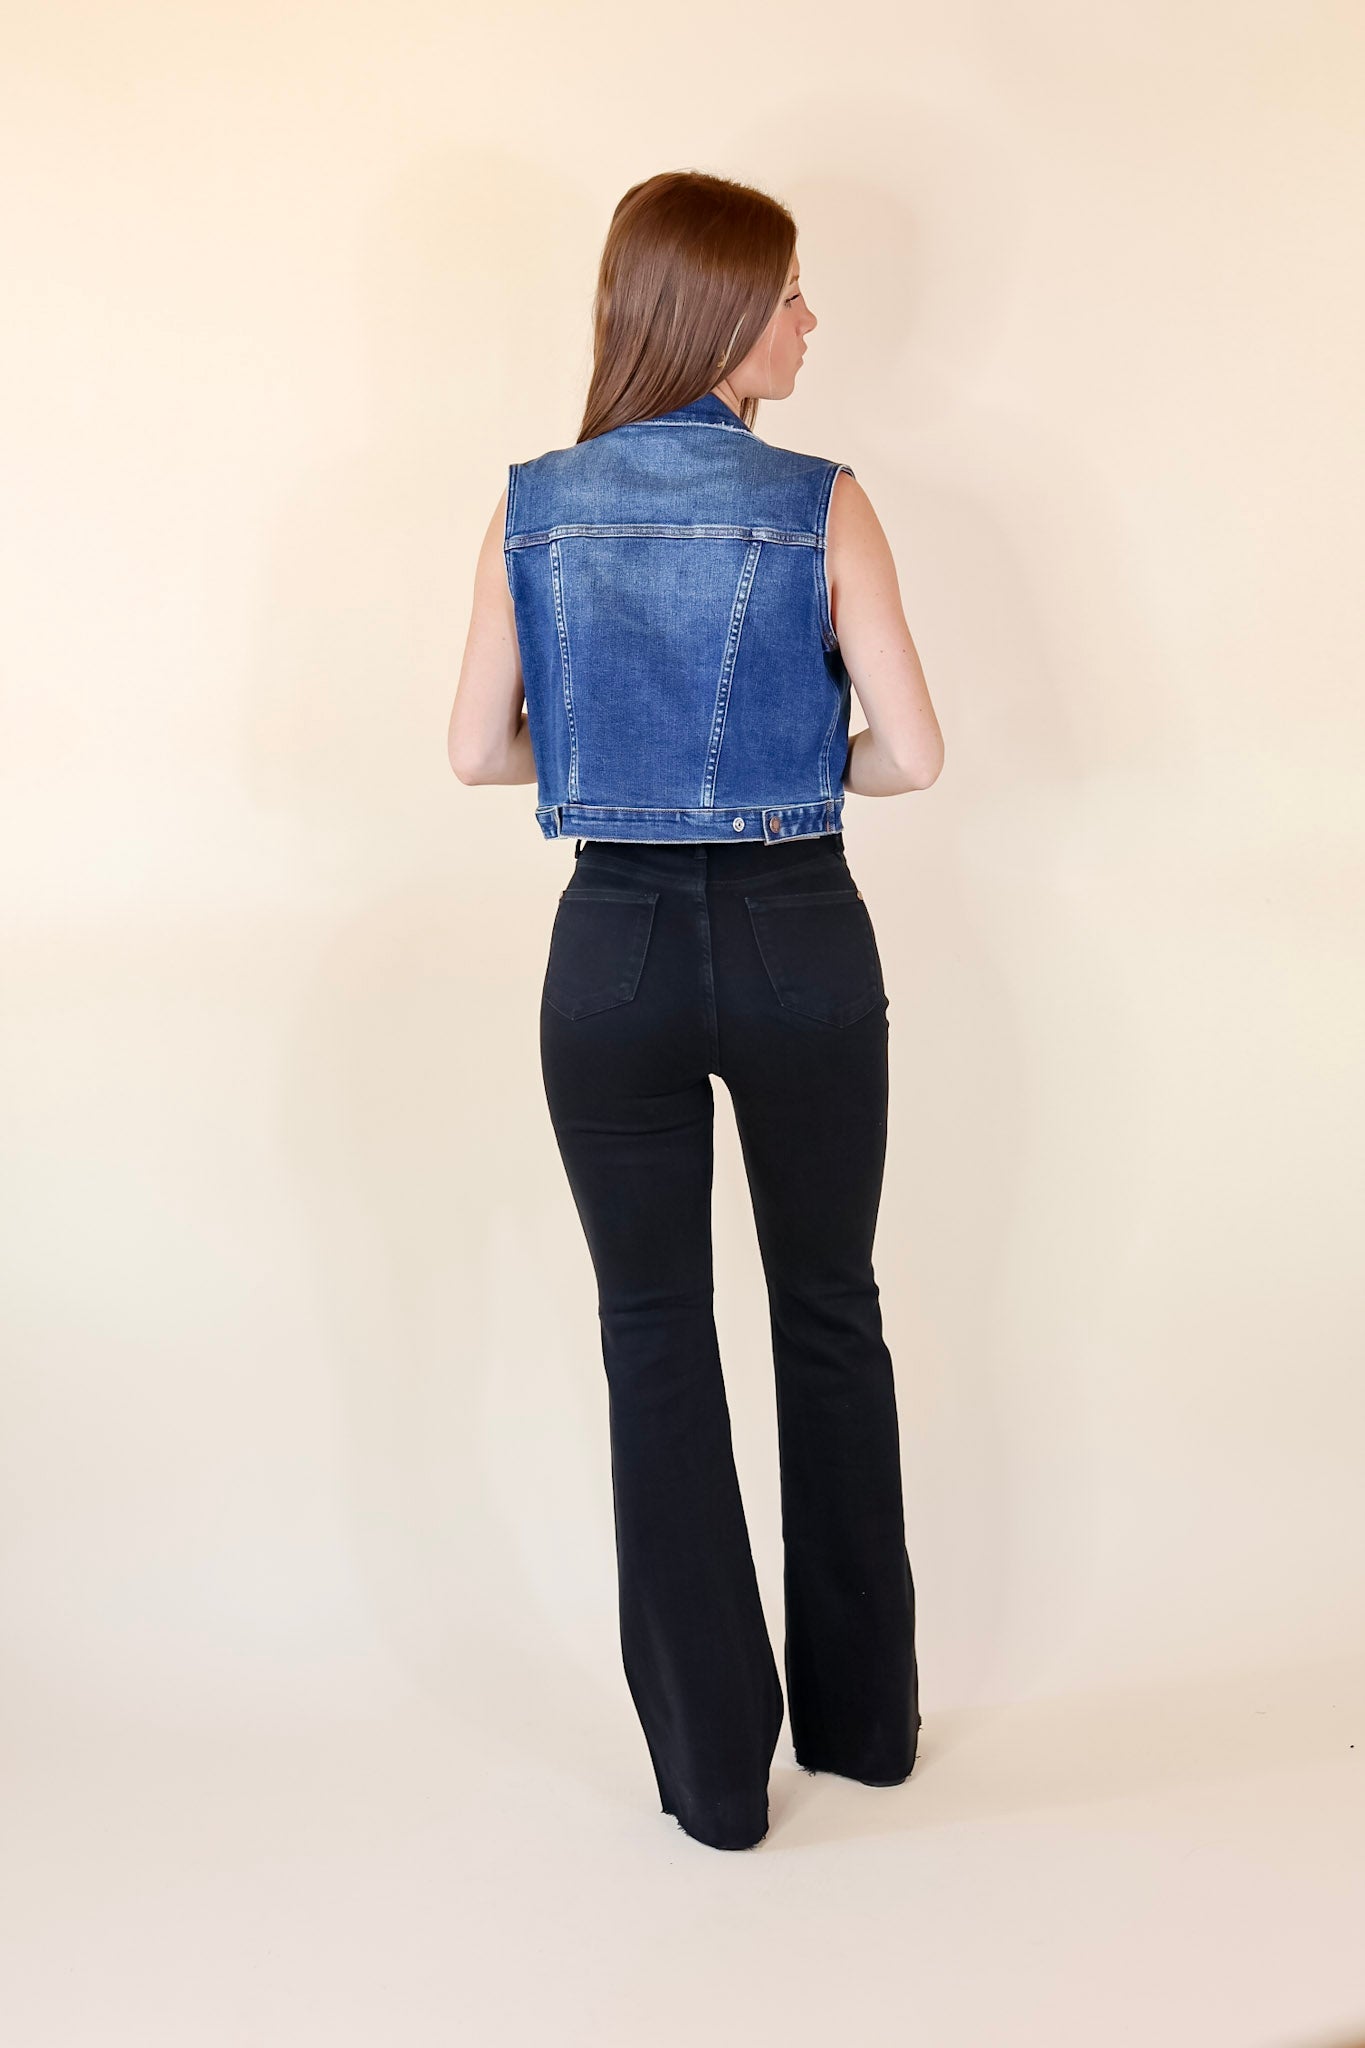 Judy Blue | Into The Woods Denim Button Up Vest in Medium Wash - Giddy Up Glamour Boutique